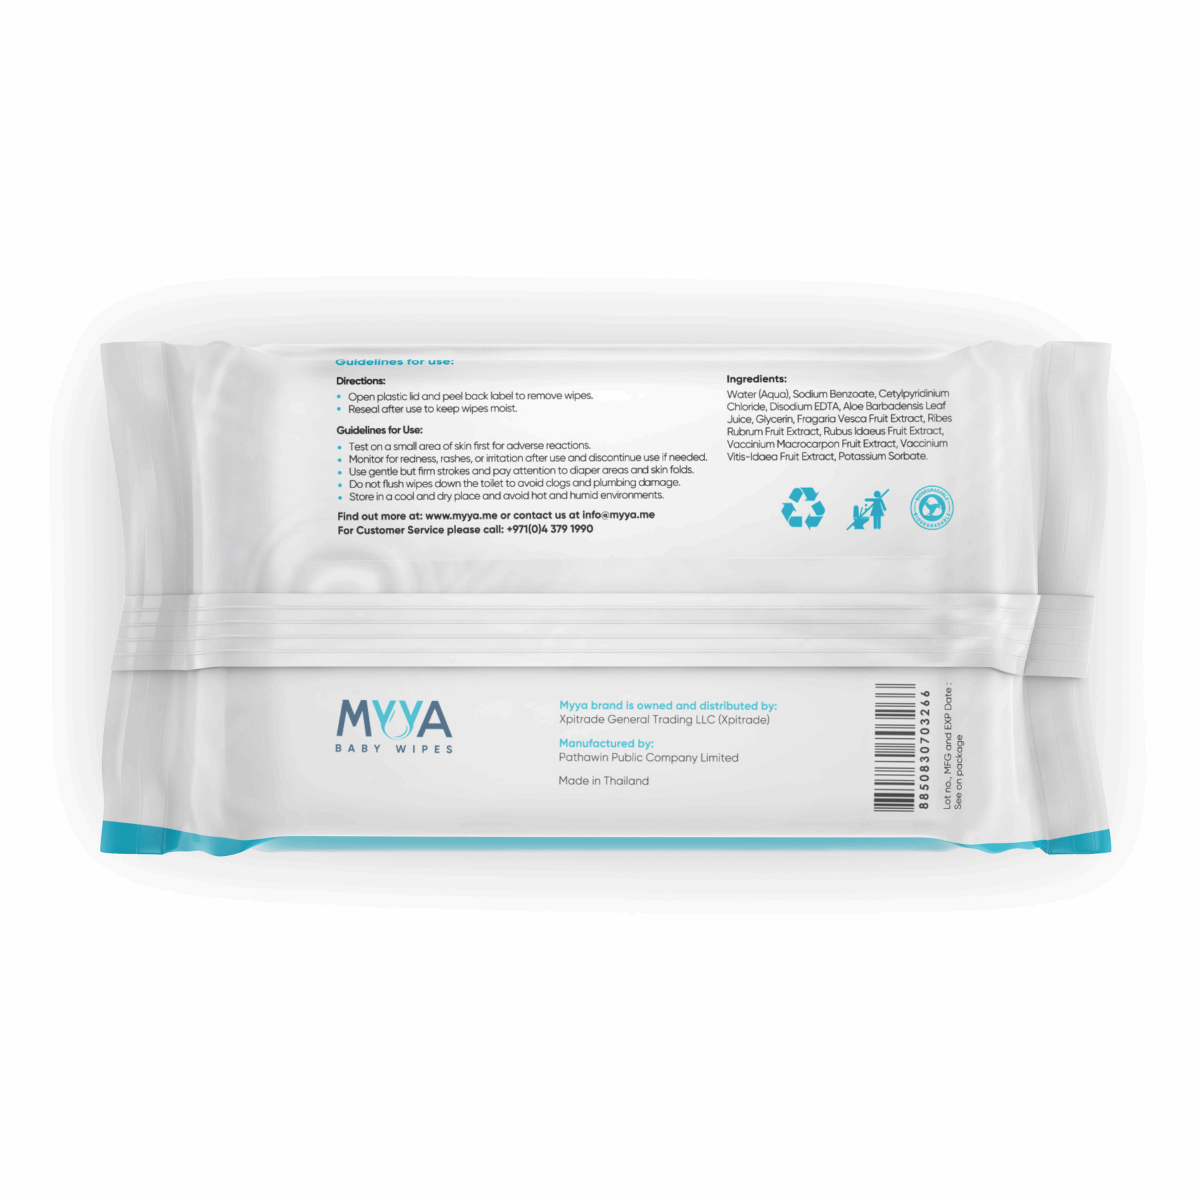 Myya Baby Wipes - 80 Wipe Count- Back of Packing with instructions